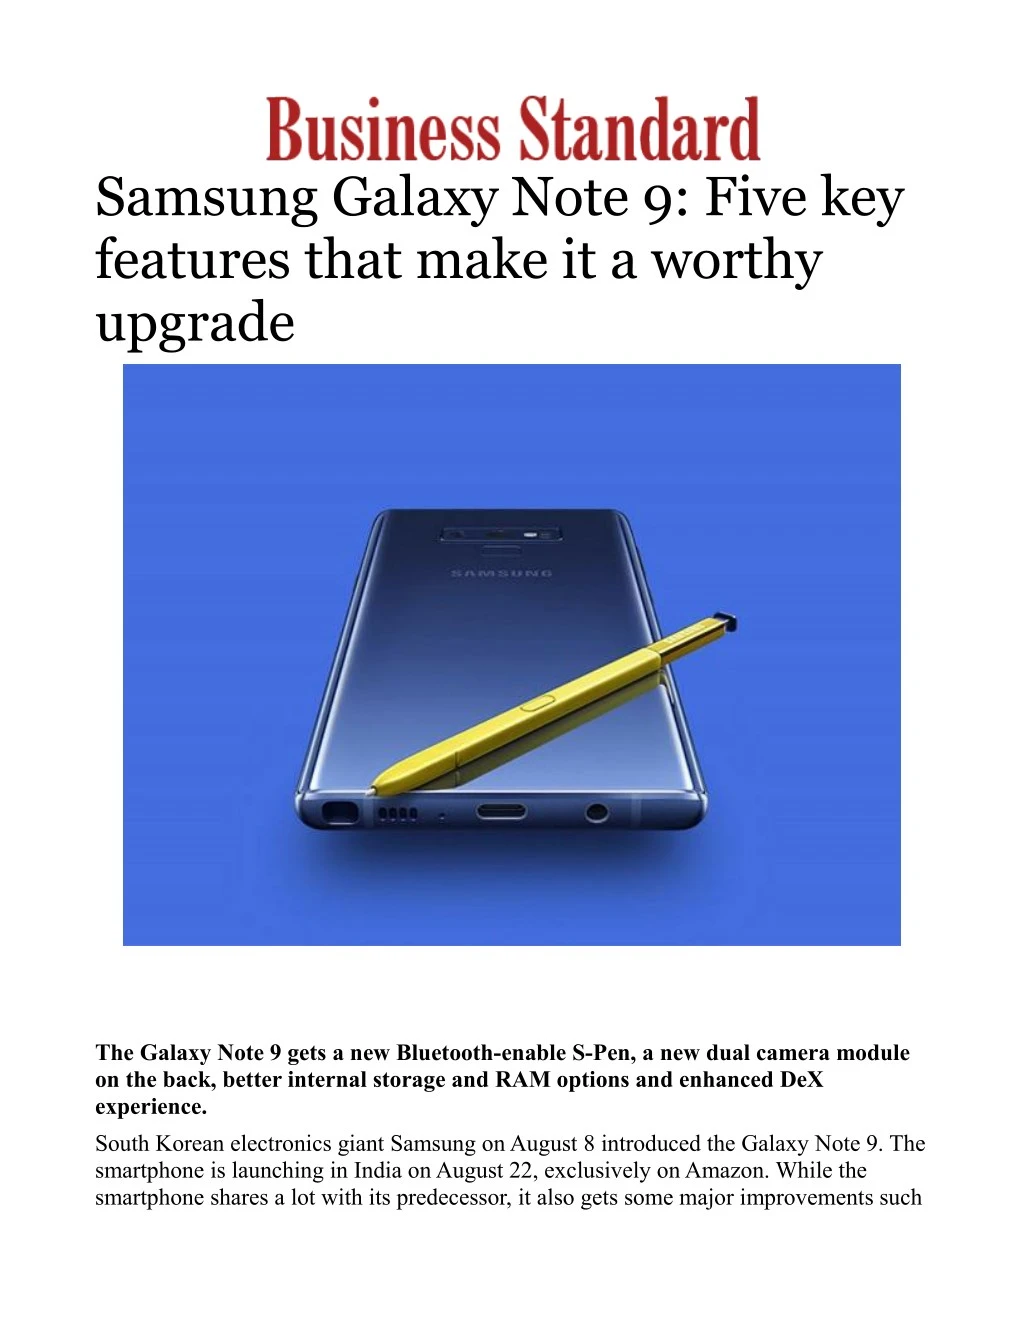 samsung galaxy note 9 five key features that make